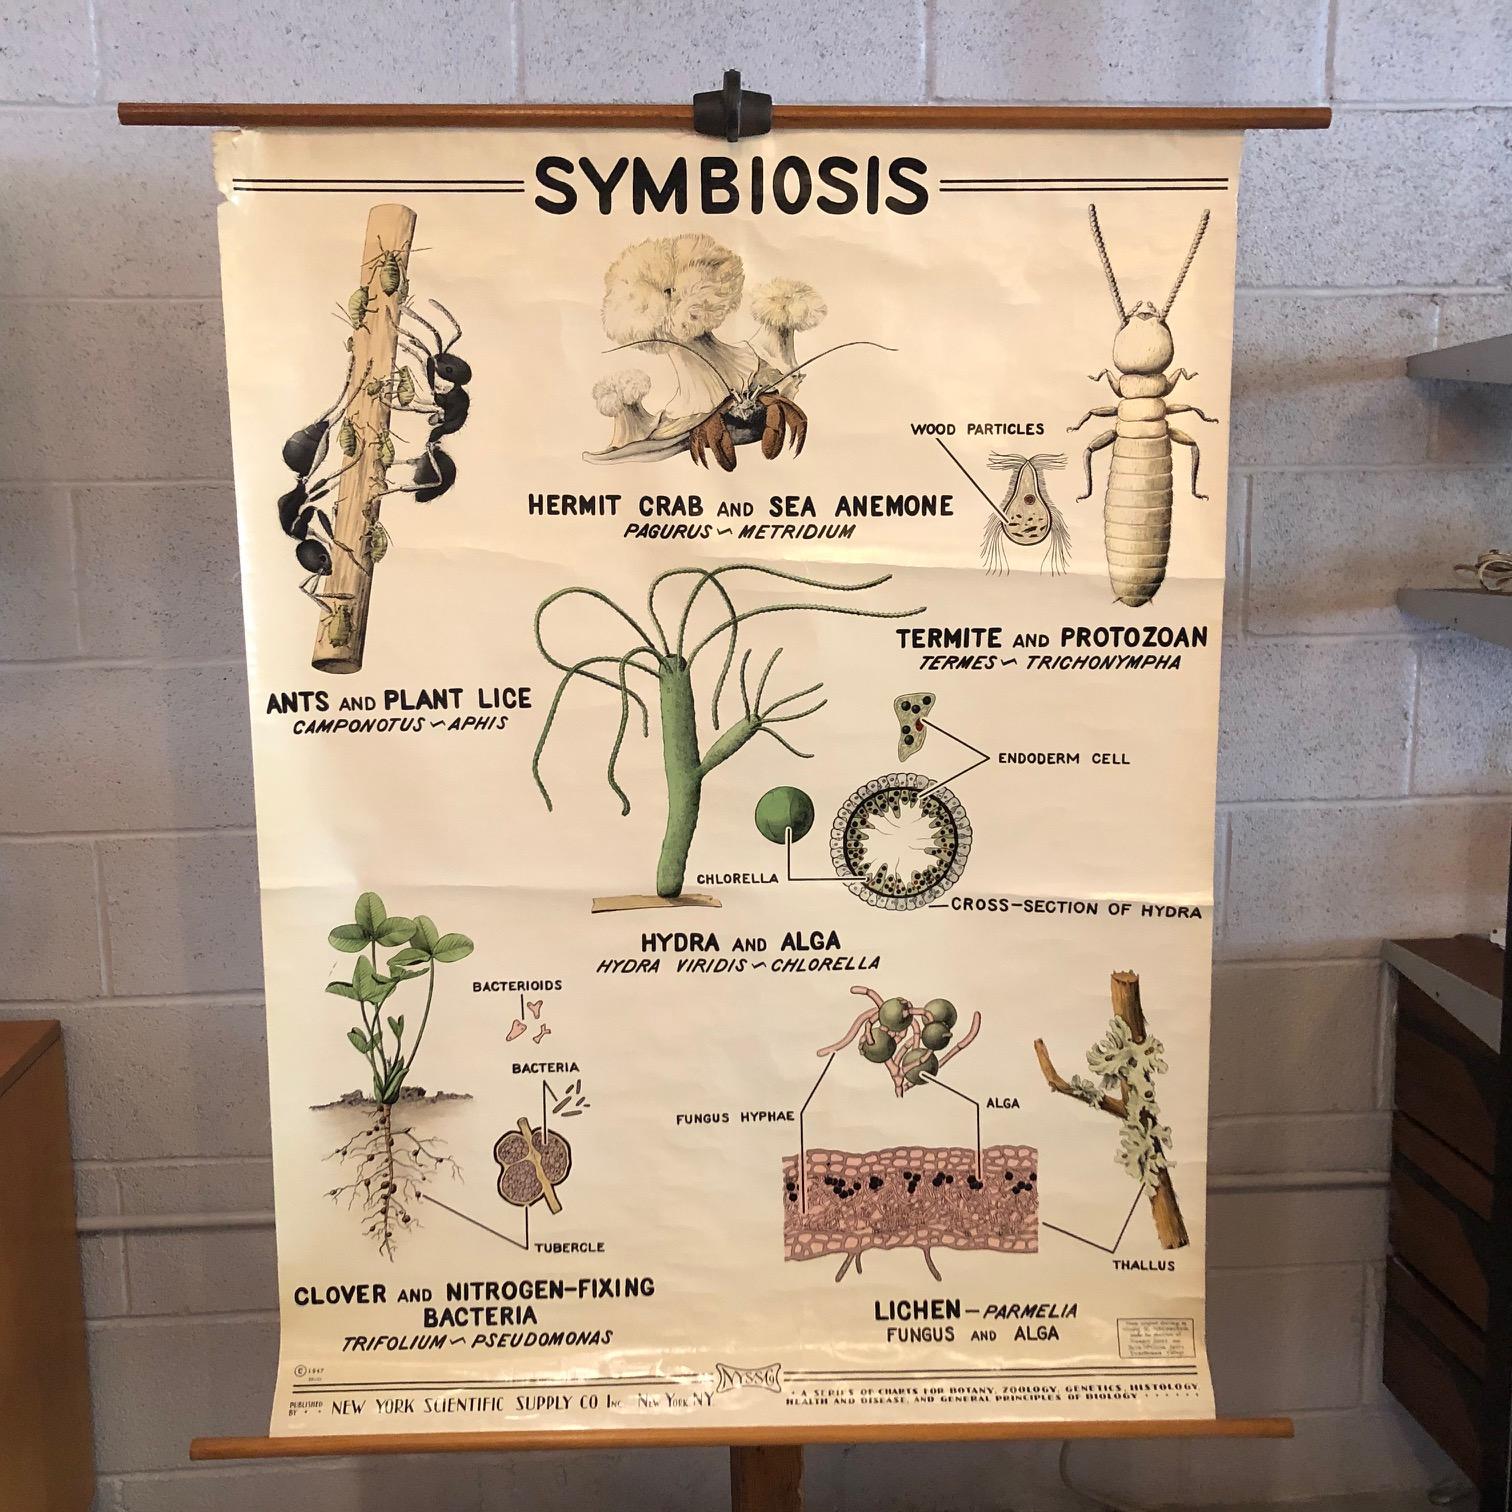 Educational, scientific, zoological, biology wall chart depicting various symbiotic relationships by New York Scientific Supply Co. Inc. beautifully illustrated by Mary R McCracken, Swathmore College is printed on fortified paper with canvas backing